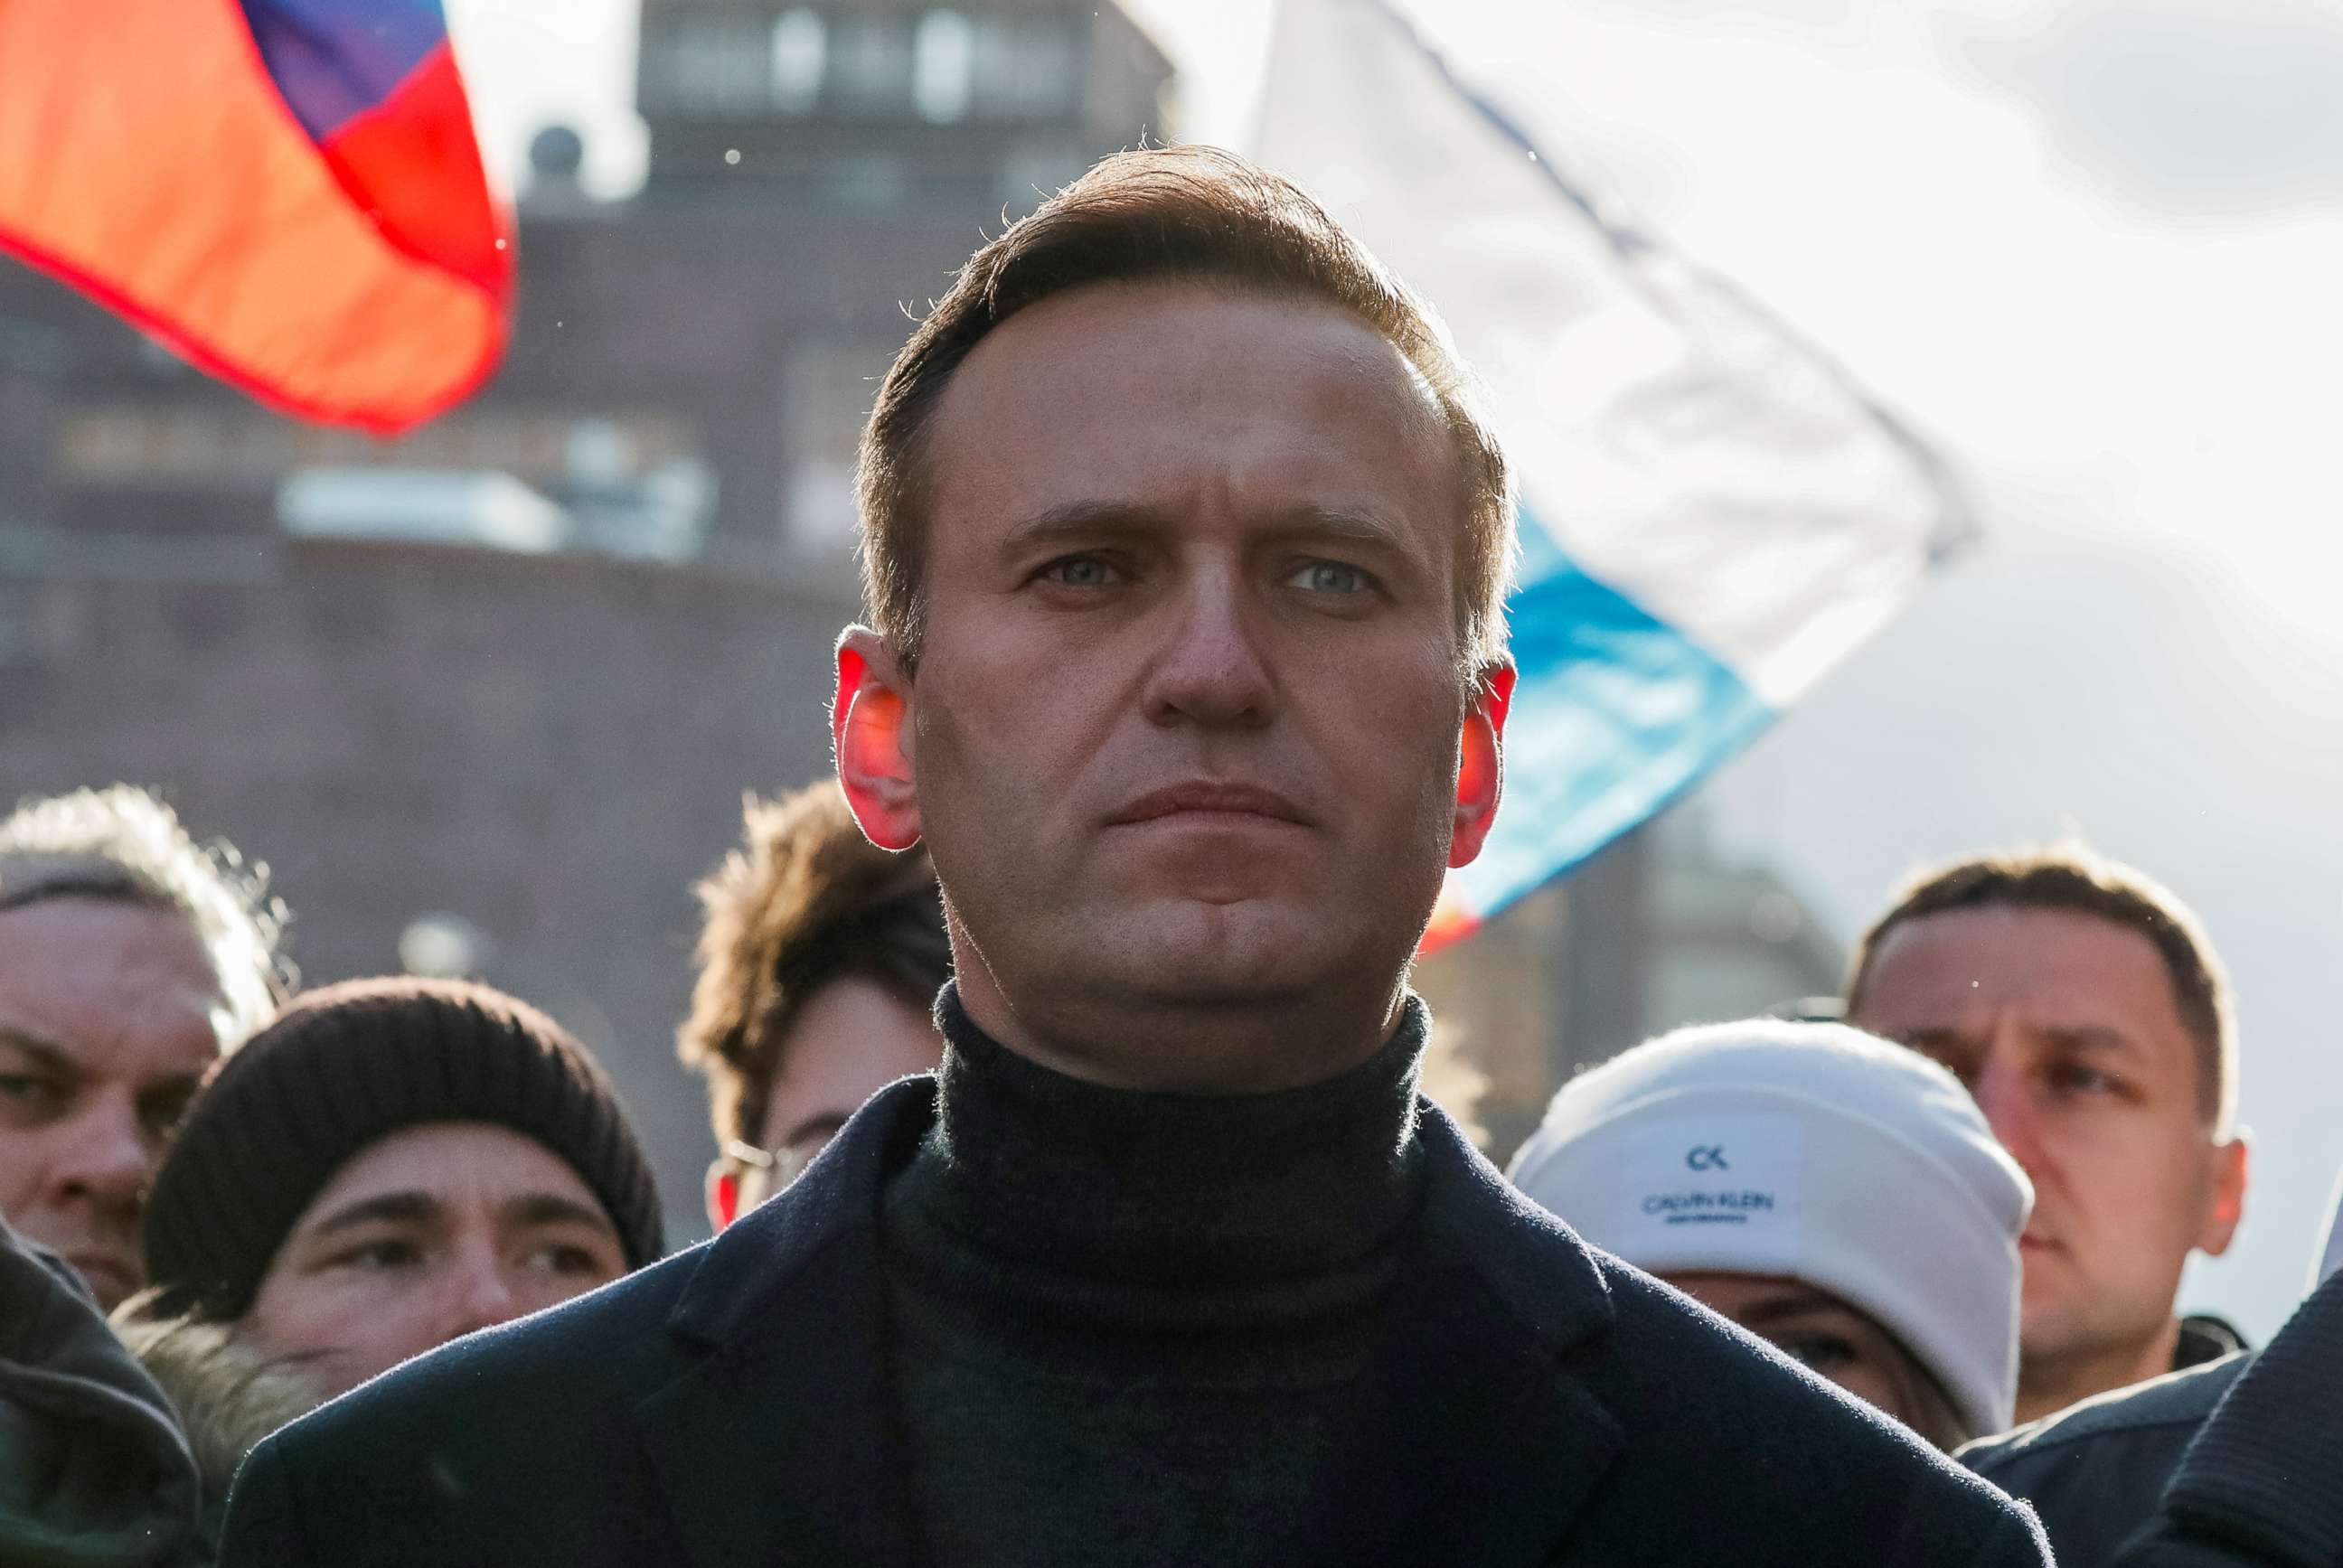 FILE PHOTO: Russian opposition politician Alexei Navalny takes part in a rally to mark the 5th anniversary of opposition politician Boris Nemtsov's murder and to protest against proposed amendments to the country's constitution.